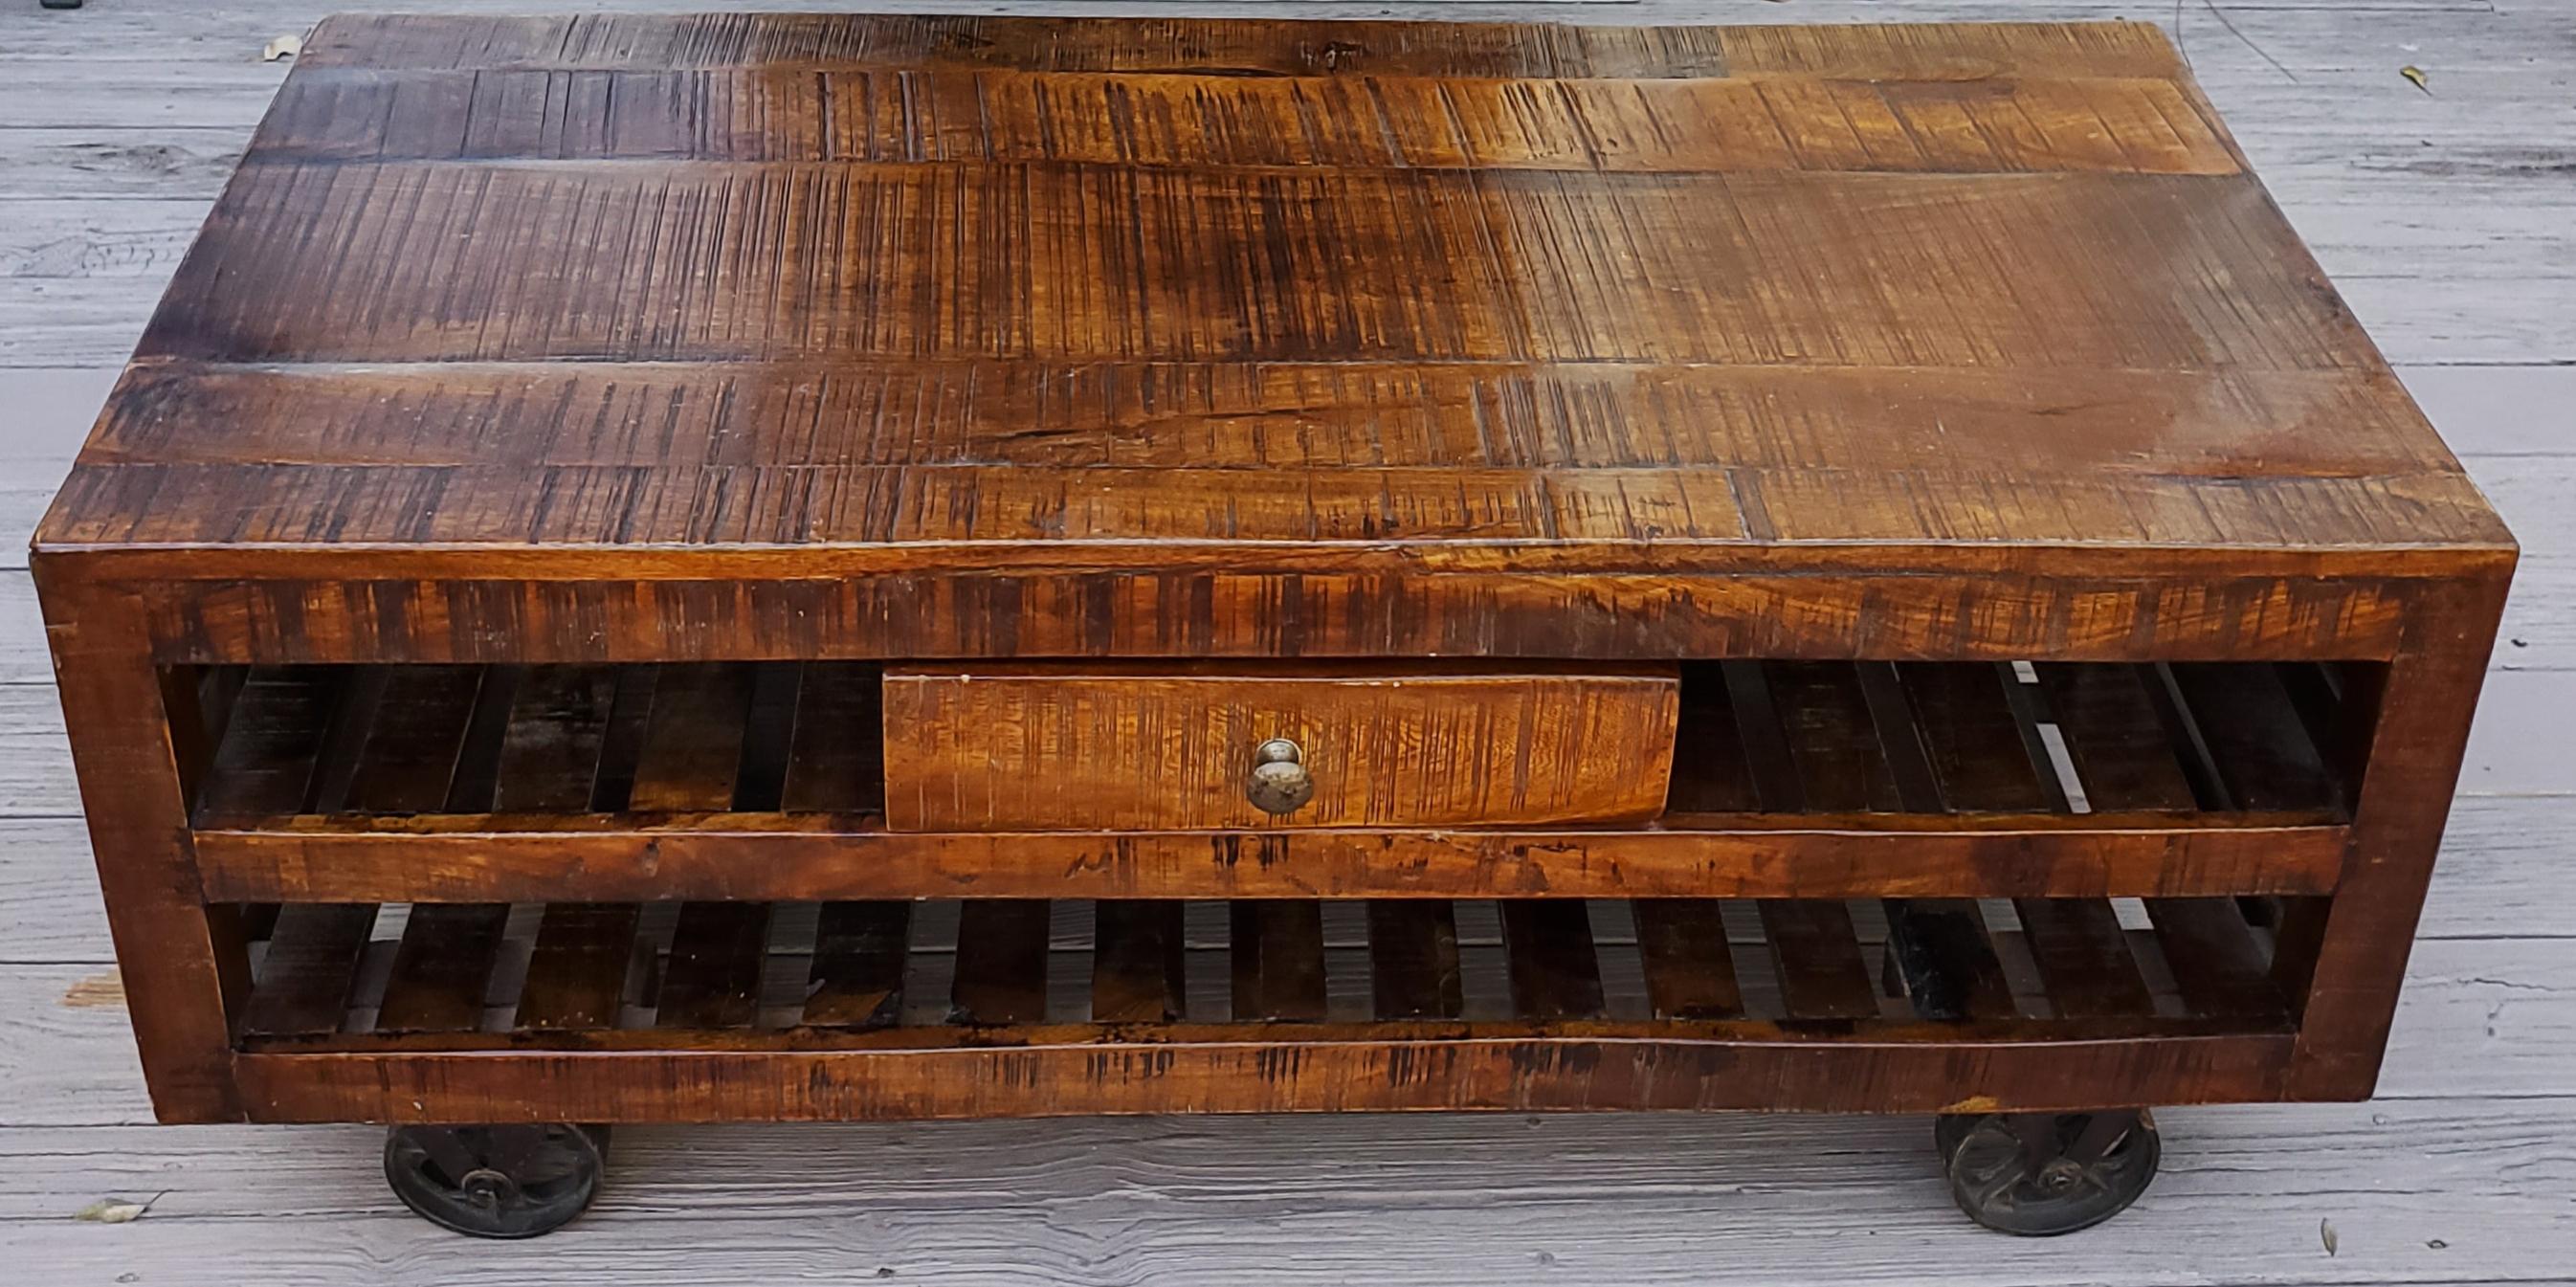 A pretty exotic looking Indian wooden coffee table. Rectangular shape with plenty of storage. Low height. Immaculate shape. This table will no doubt be an excellent add-on to your home or office décor. It measures approximately 48